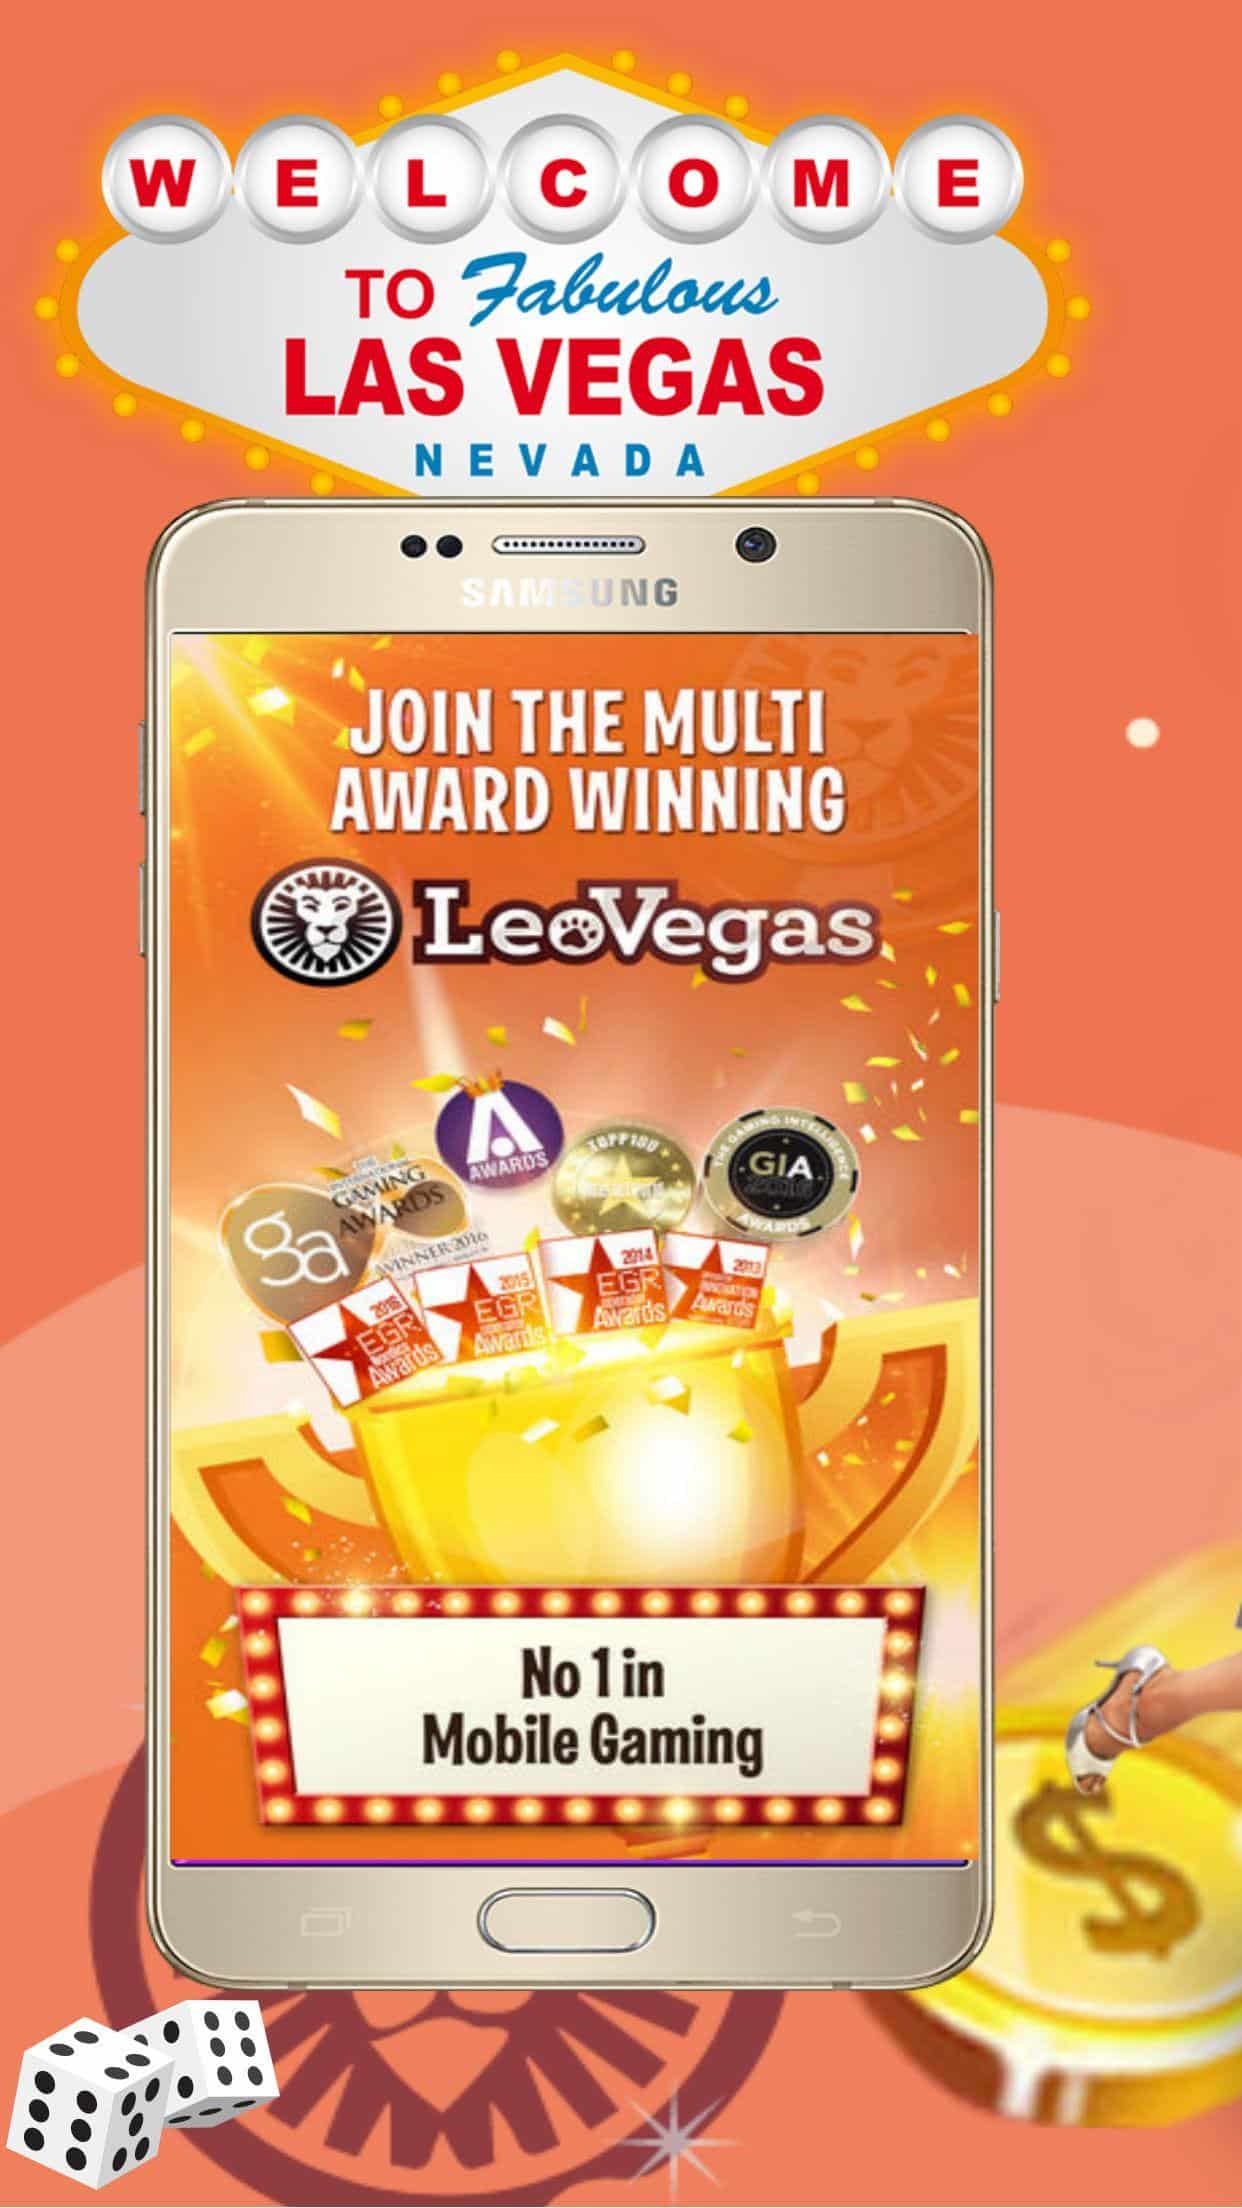 Get Ready To Win Big At Leovegas: India's Top Casino Site For Big Rewards